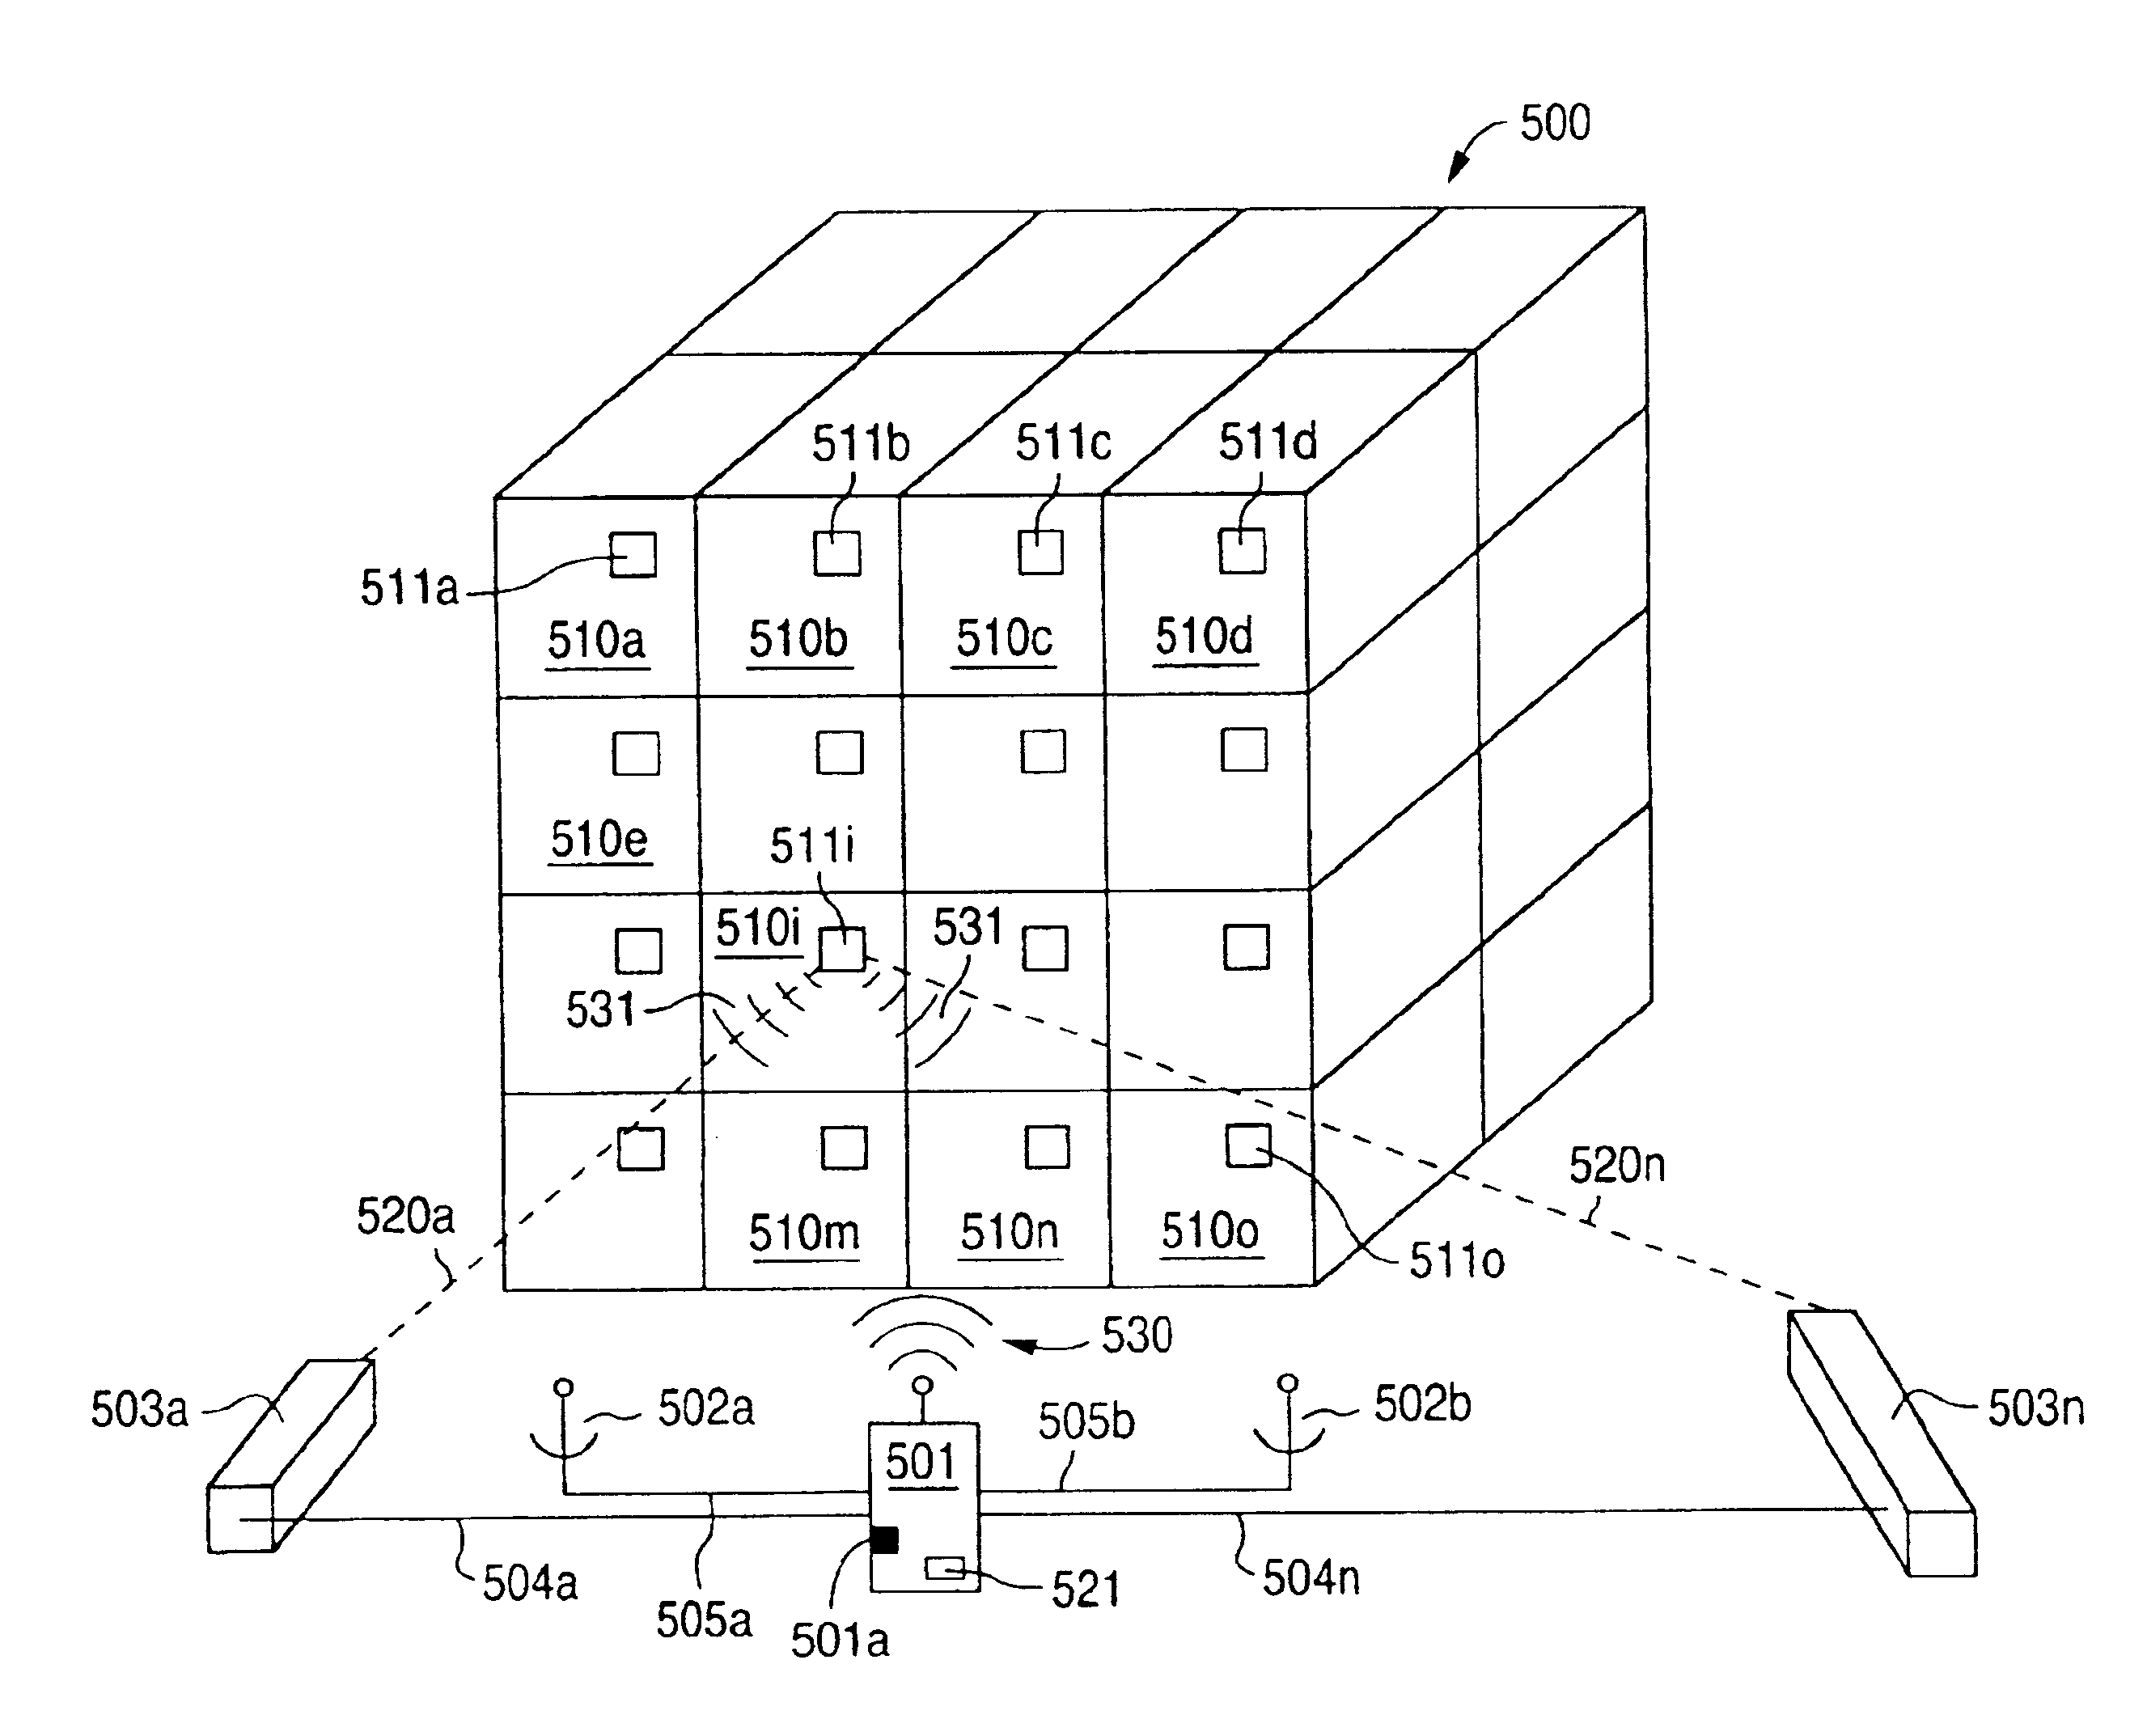 System and method for amalgamating multiple shipping companies using reusable containers and wide area networks